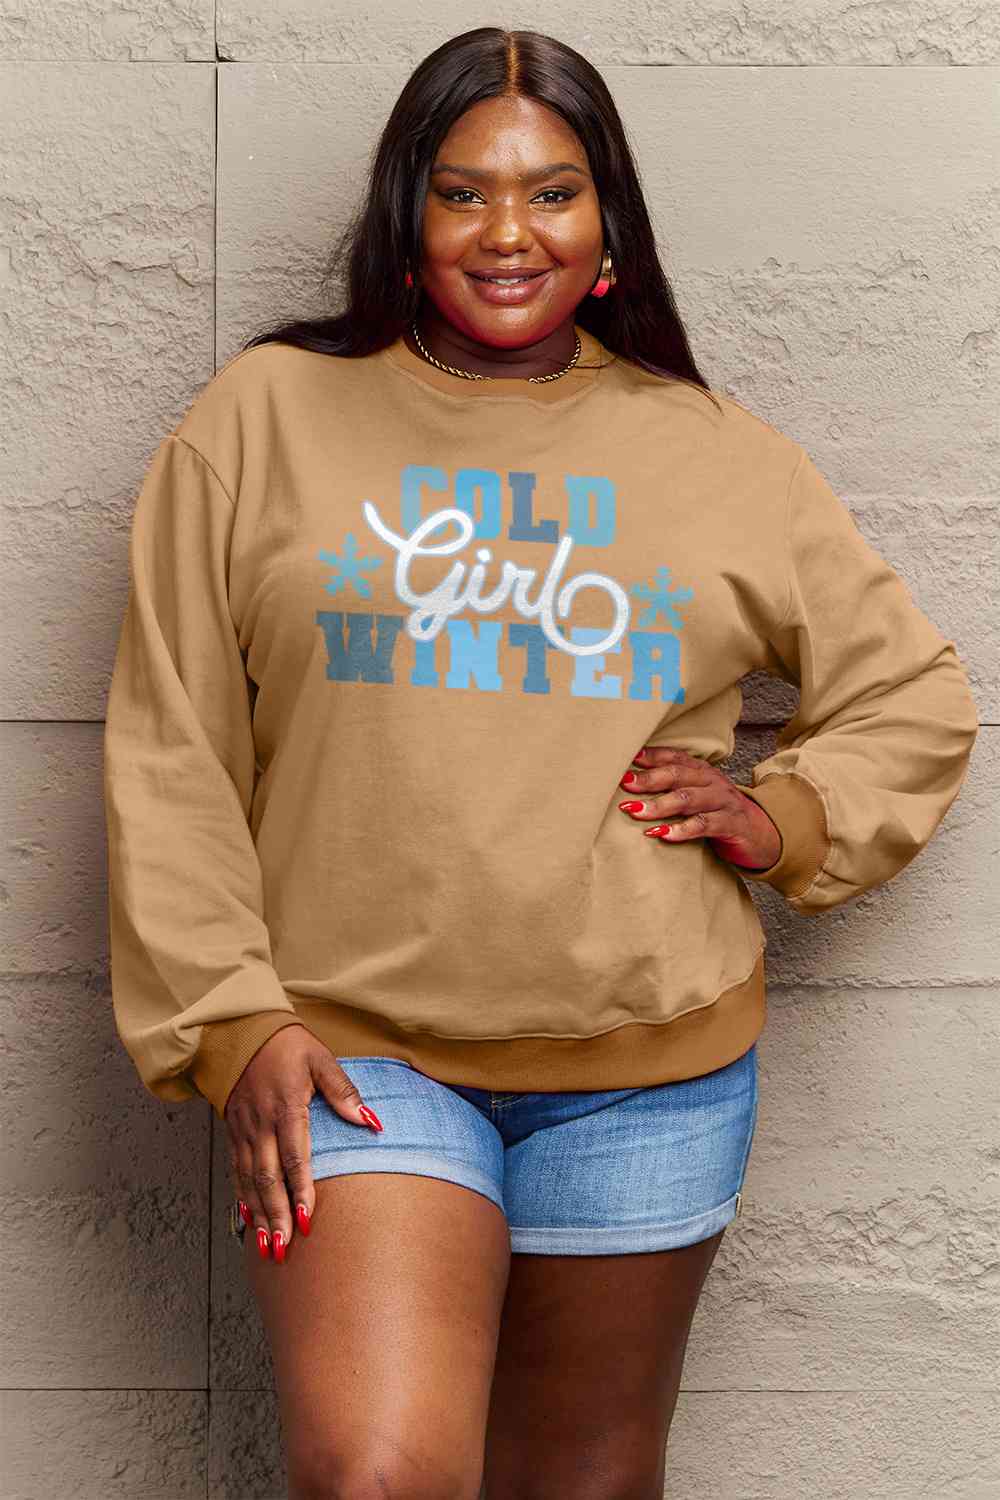 Simply Love Full Size COLD WINTER Graphic Long Sleeve Sweatshirt